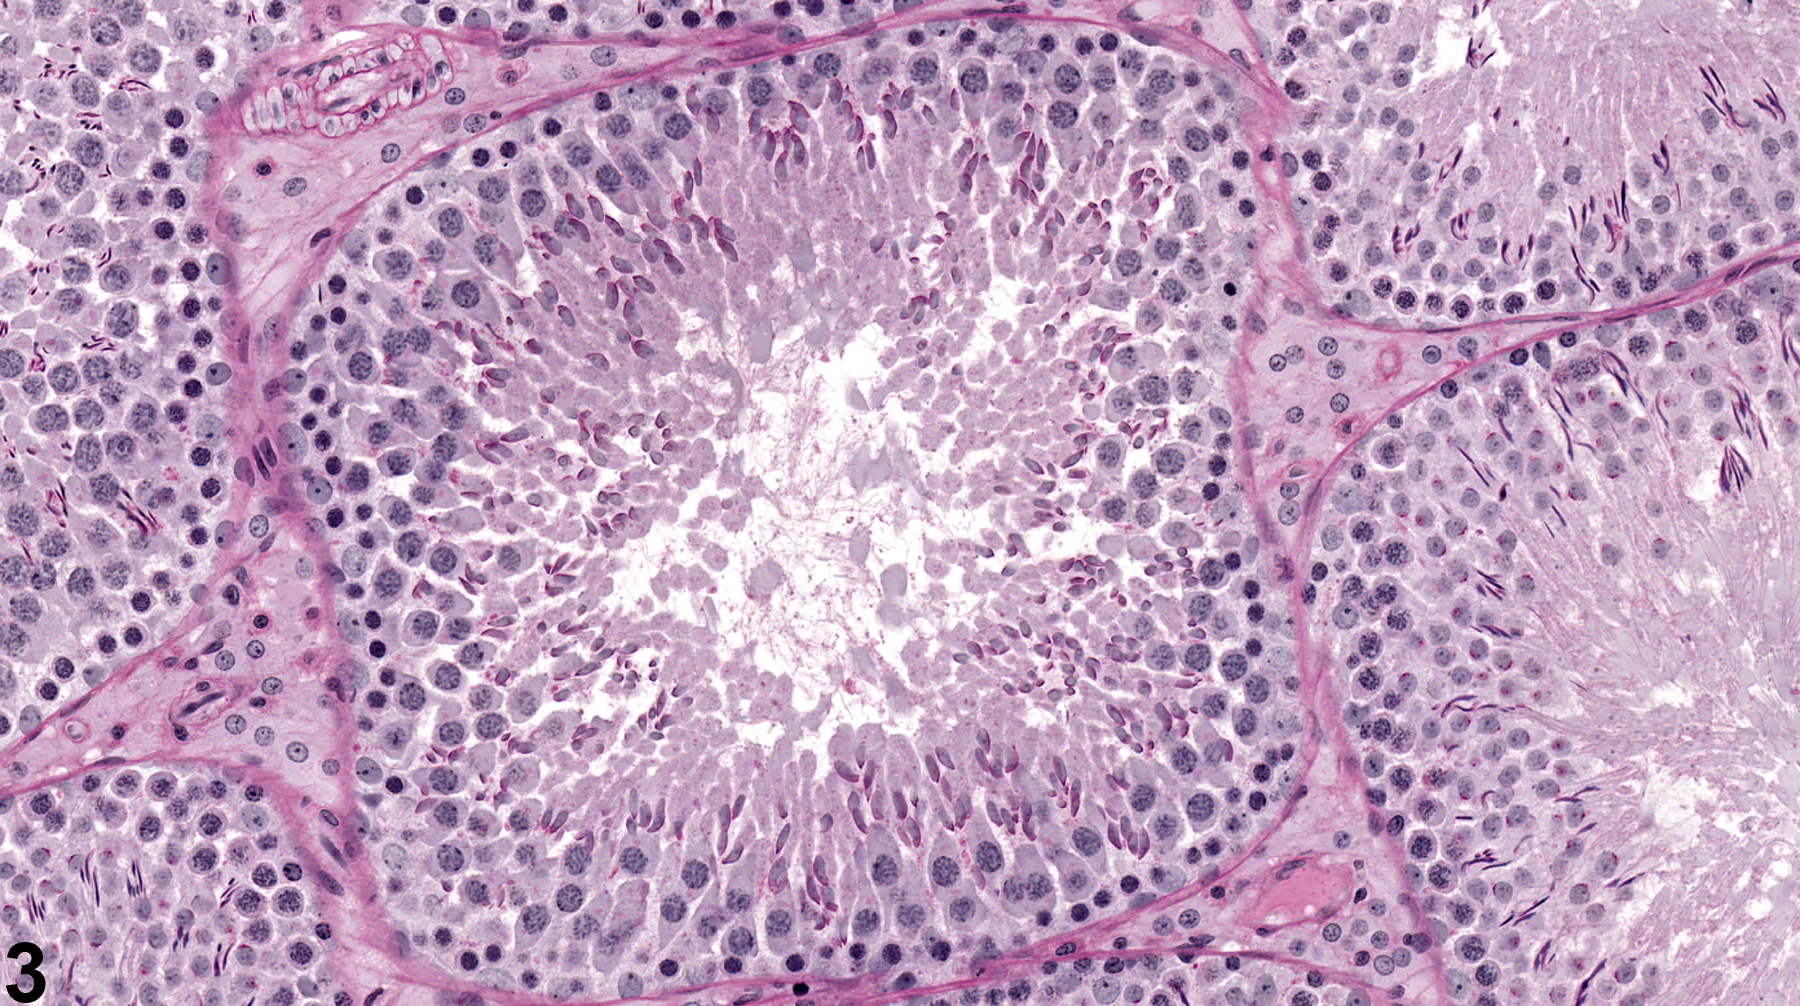 Image of seminiferous tubule normal in the testis from a male Sprague-Dawley rat